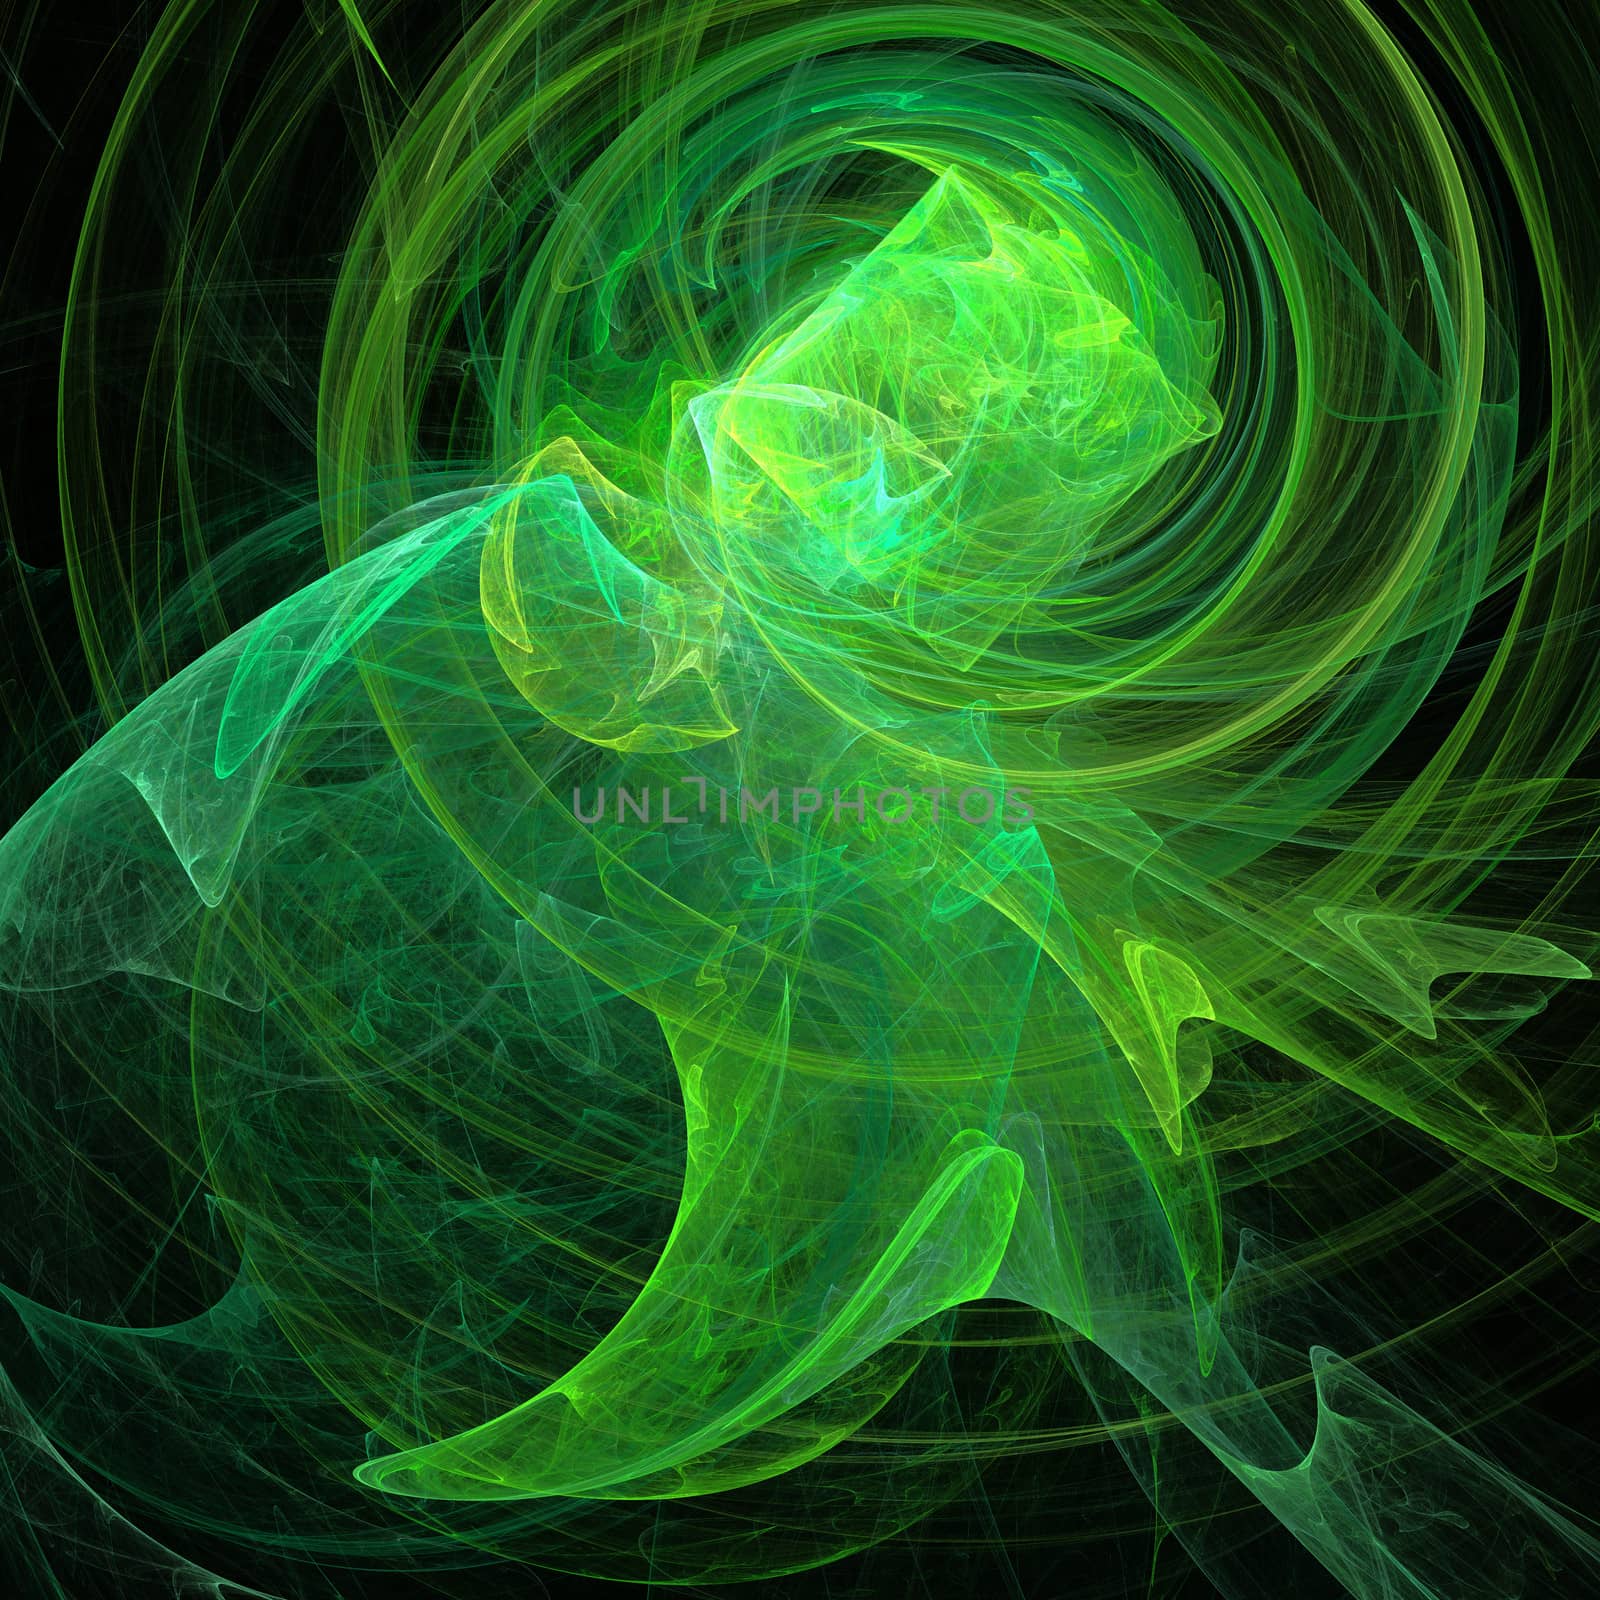 Abstract fractal background by jame_j@homail.com